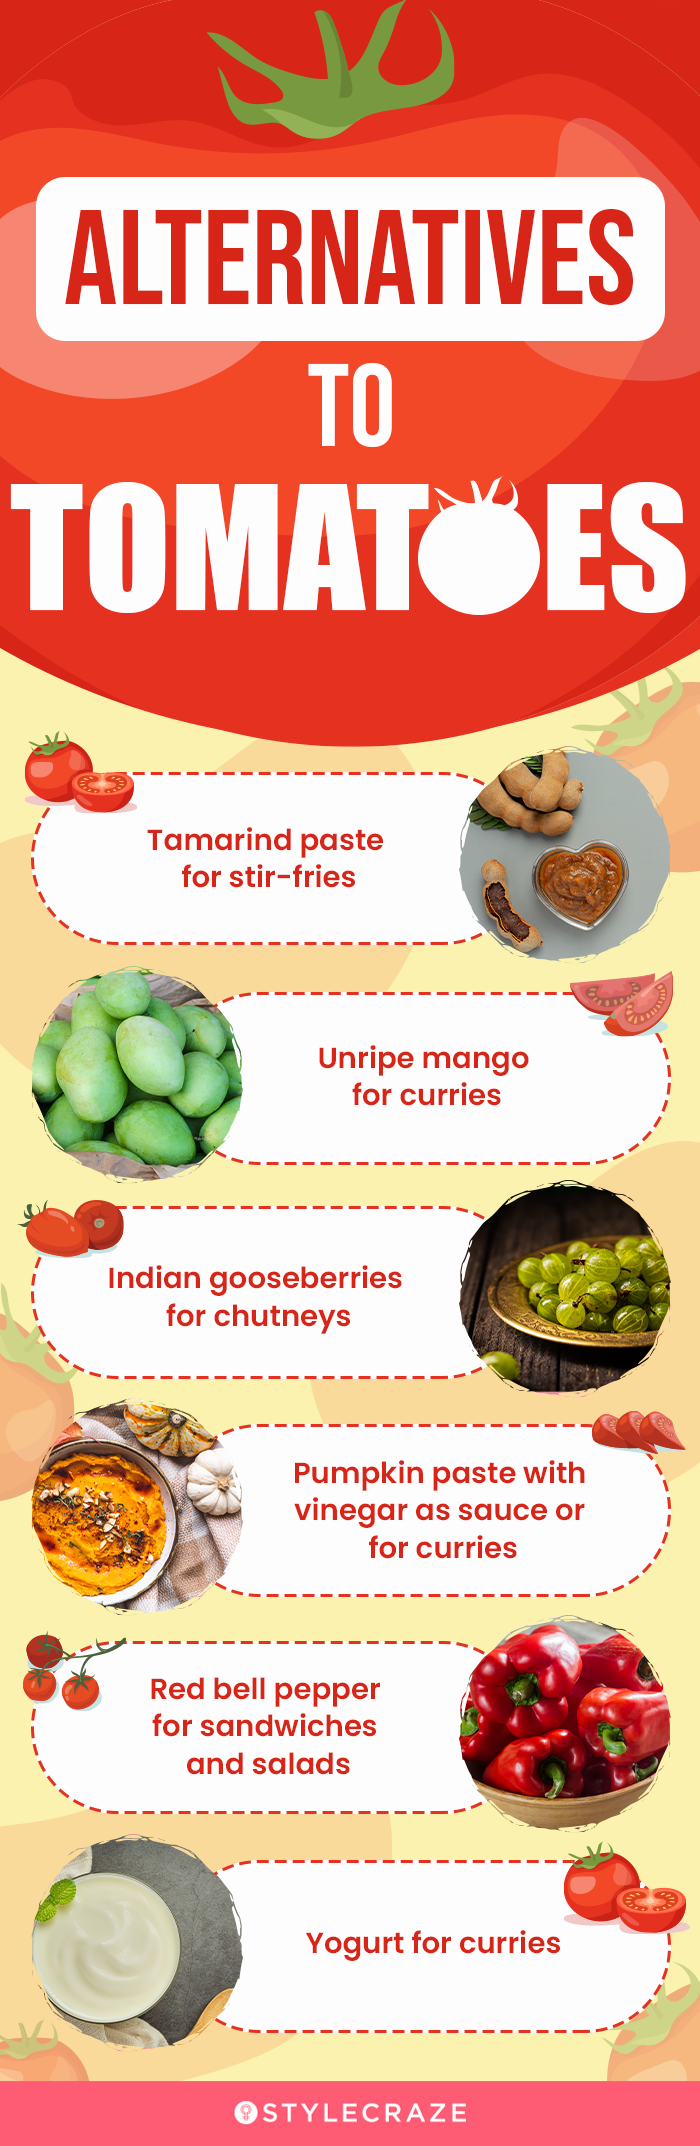 alternatives to tomatoes(infographic)